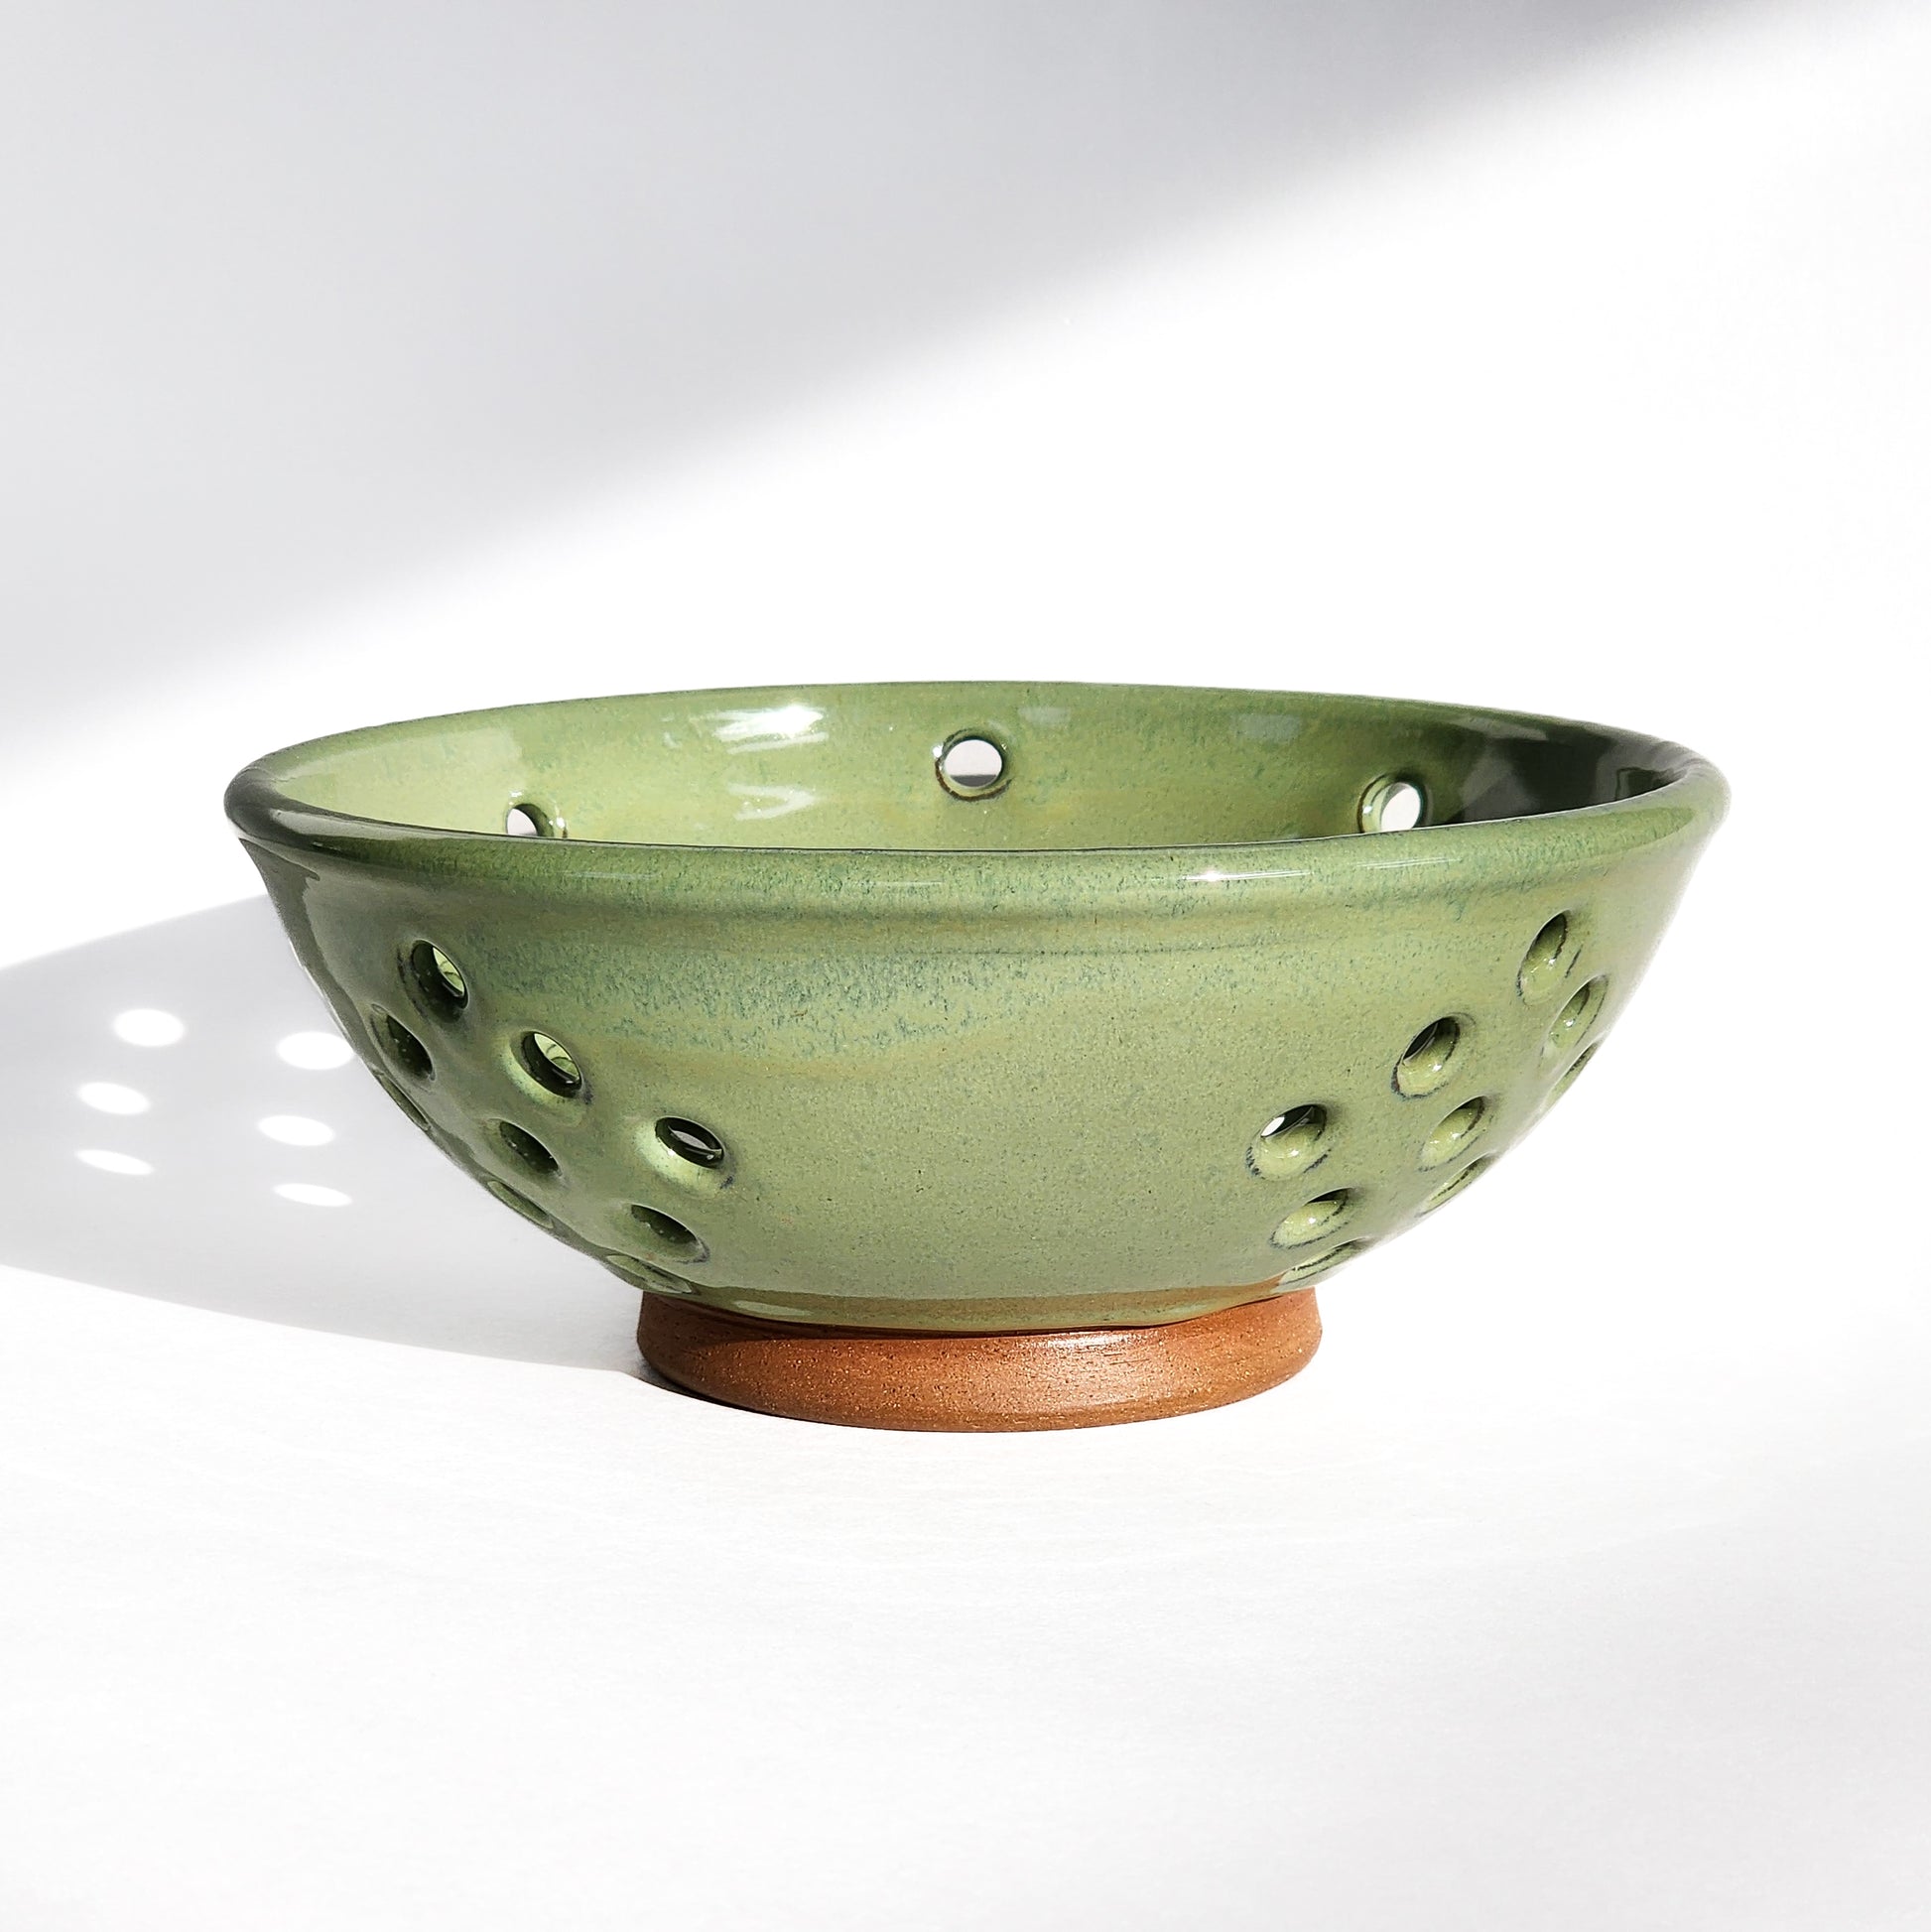 Image: Clinton Pottery's Handmade Medium Colander in Bud Green – A visually appealing and functional kitchen accessory, expertly crafted. This 4 cup colander in refreshing Bud Green is perfect for washing fruits, veggies, or as a stylish counter fruit bowl. Machine washable and seamlessly blending functionality with vibrant charm, it's ideal for those seeking style and practicality.